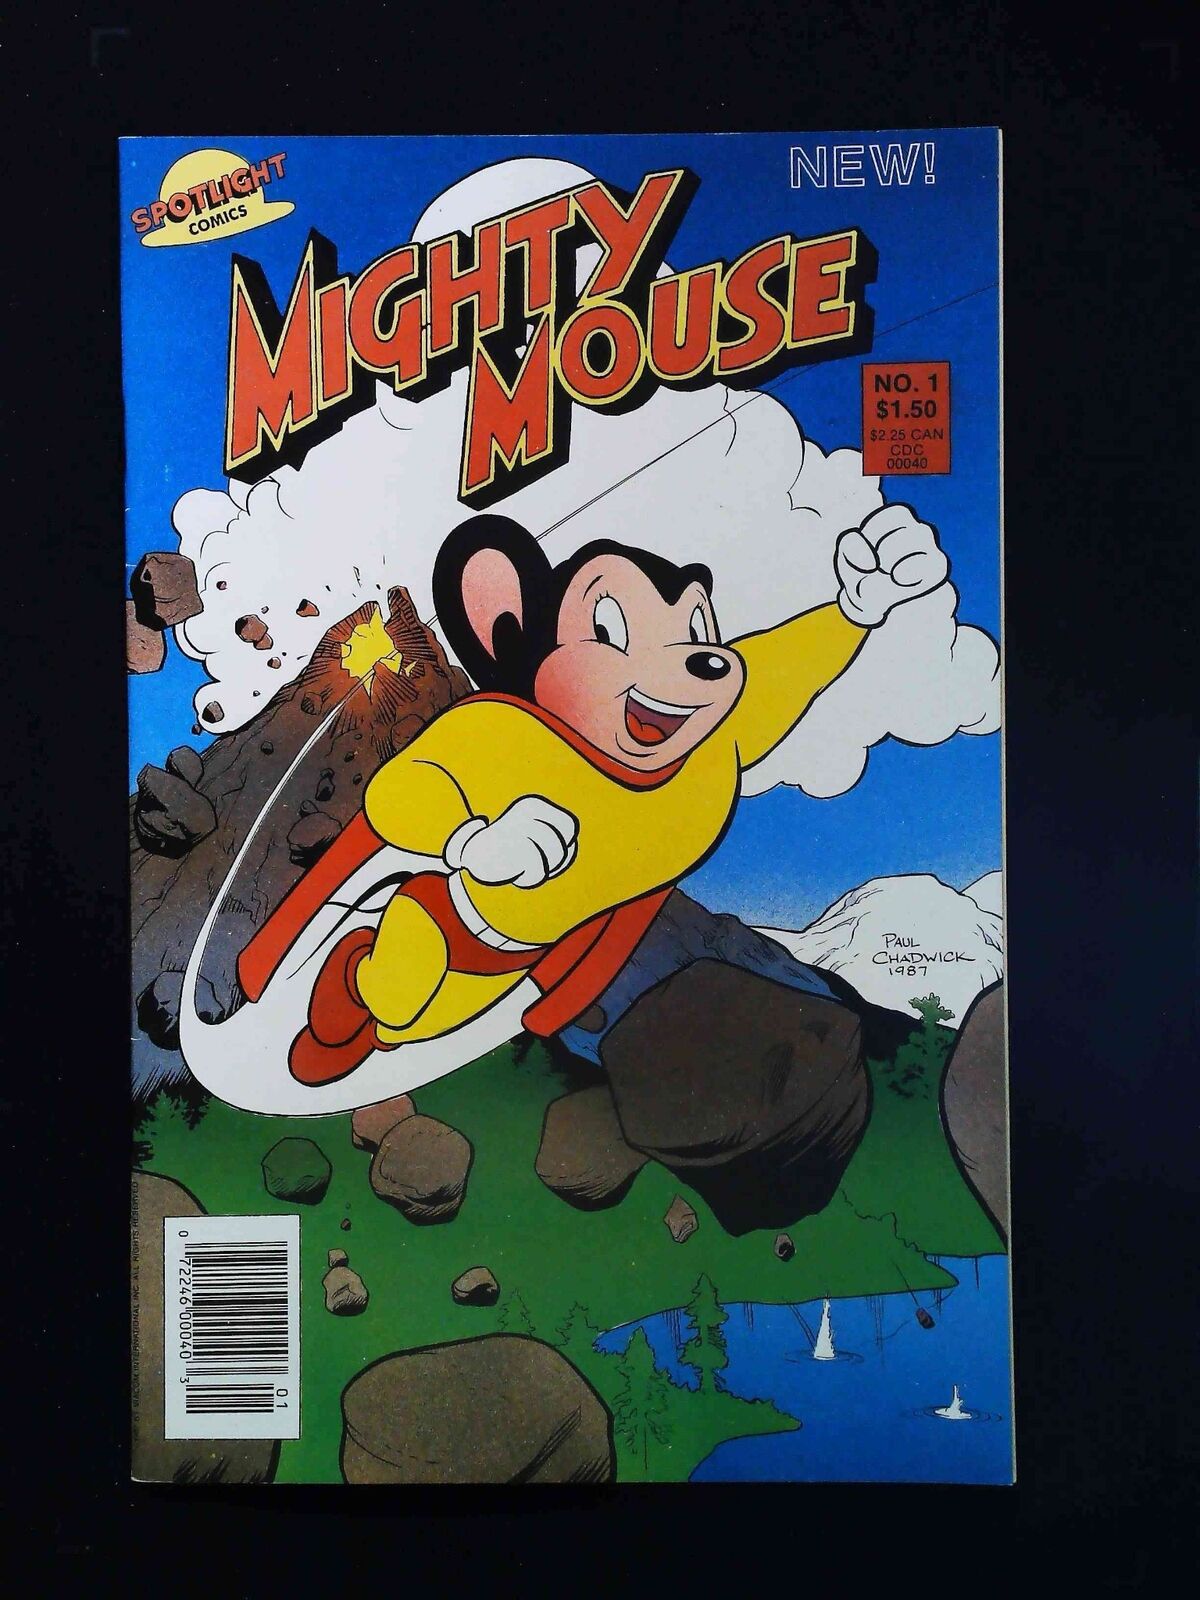 MIGHTY MOUSE #1  SPOTLIGHT COMICS 1987 VF+ NEWSSTAND